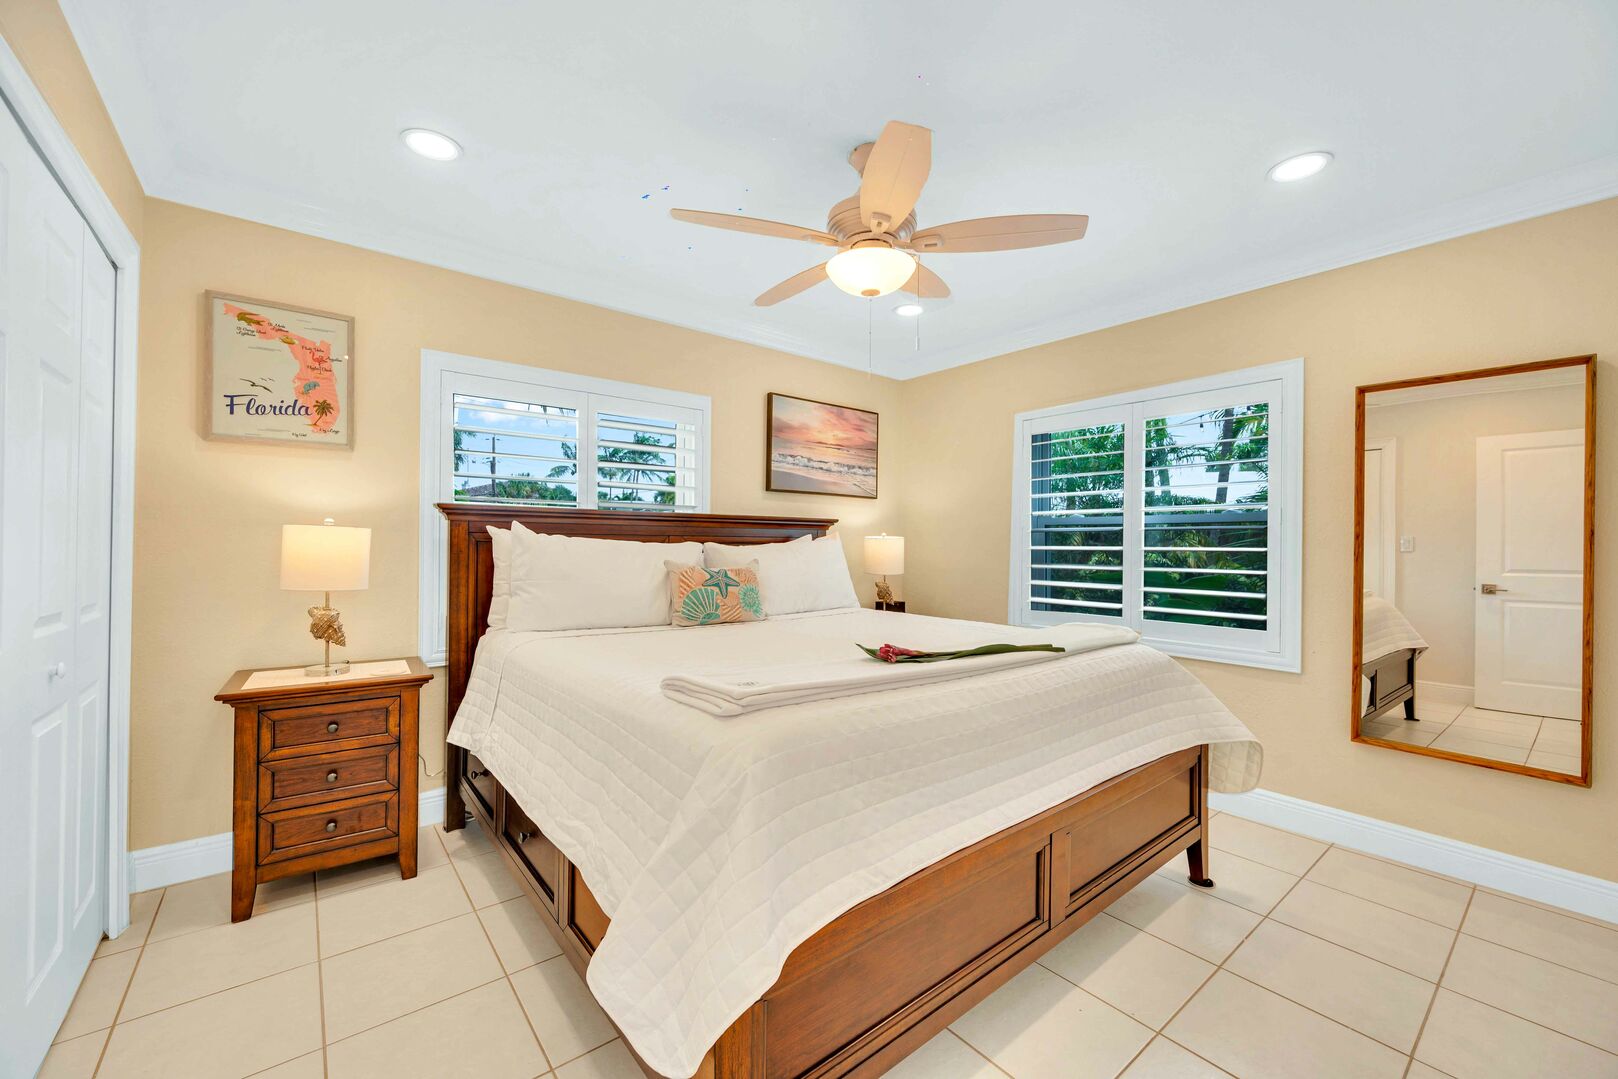 The spacious second bedroom offers plenty of daylight, a king size bed and a smart TV.